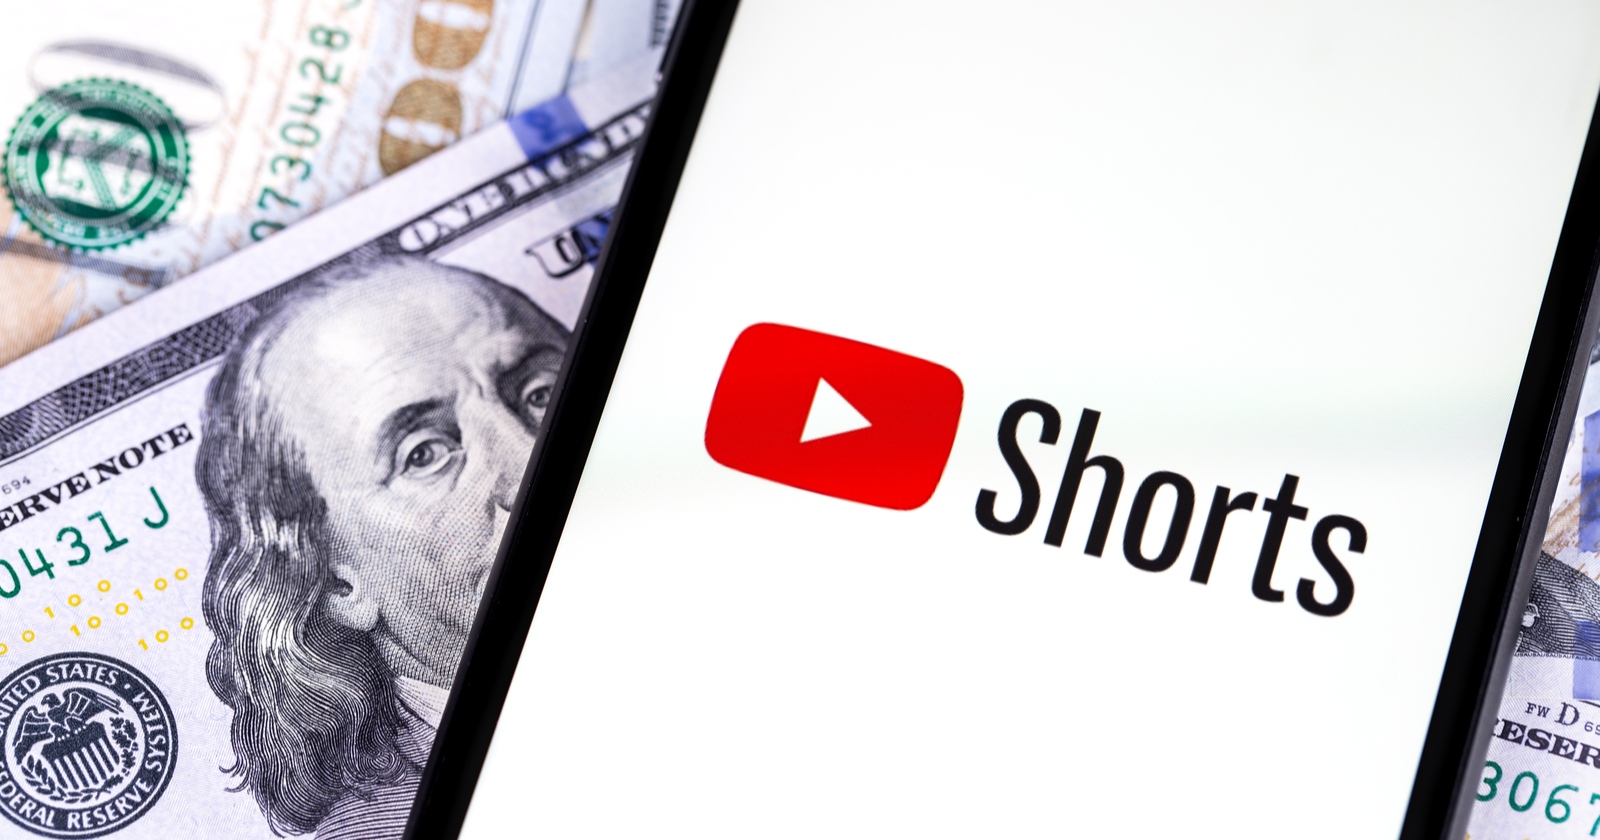 YouTube Confirms Shorts Views Don’t Count For Monetization via @sejournal, @MattGSouthern